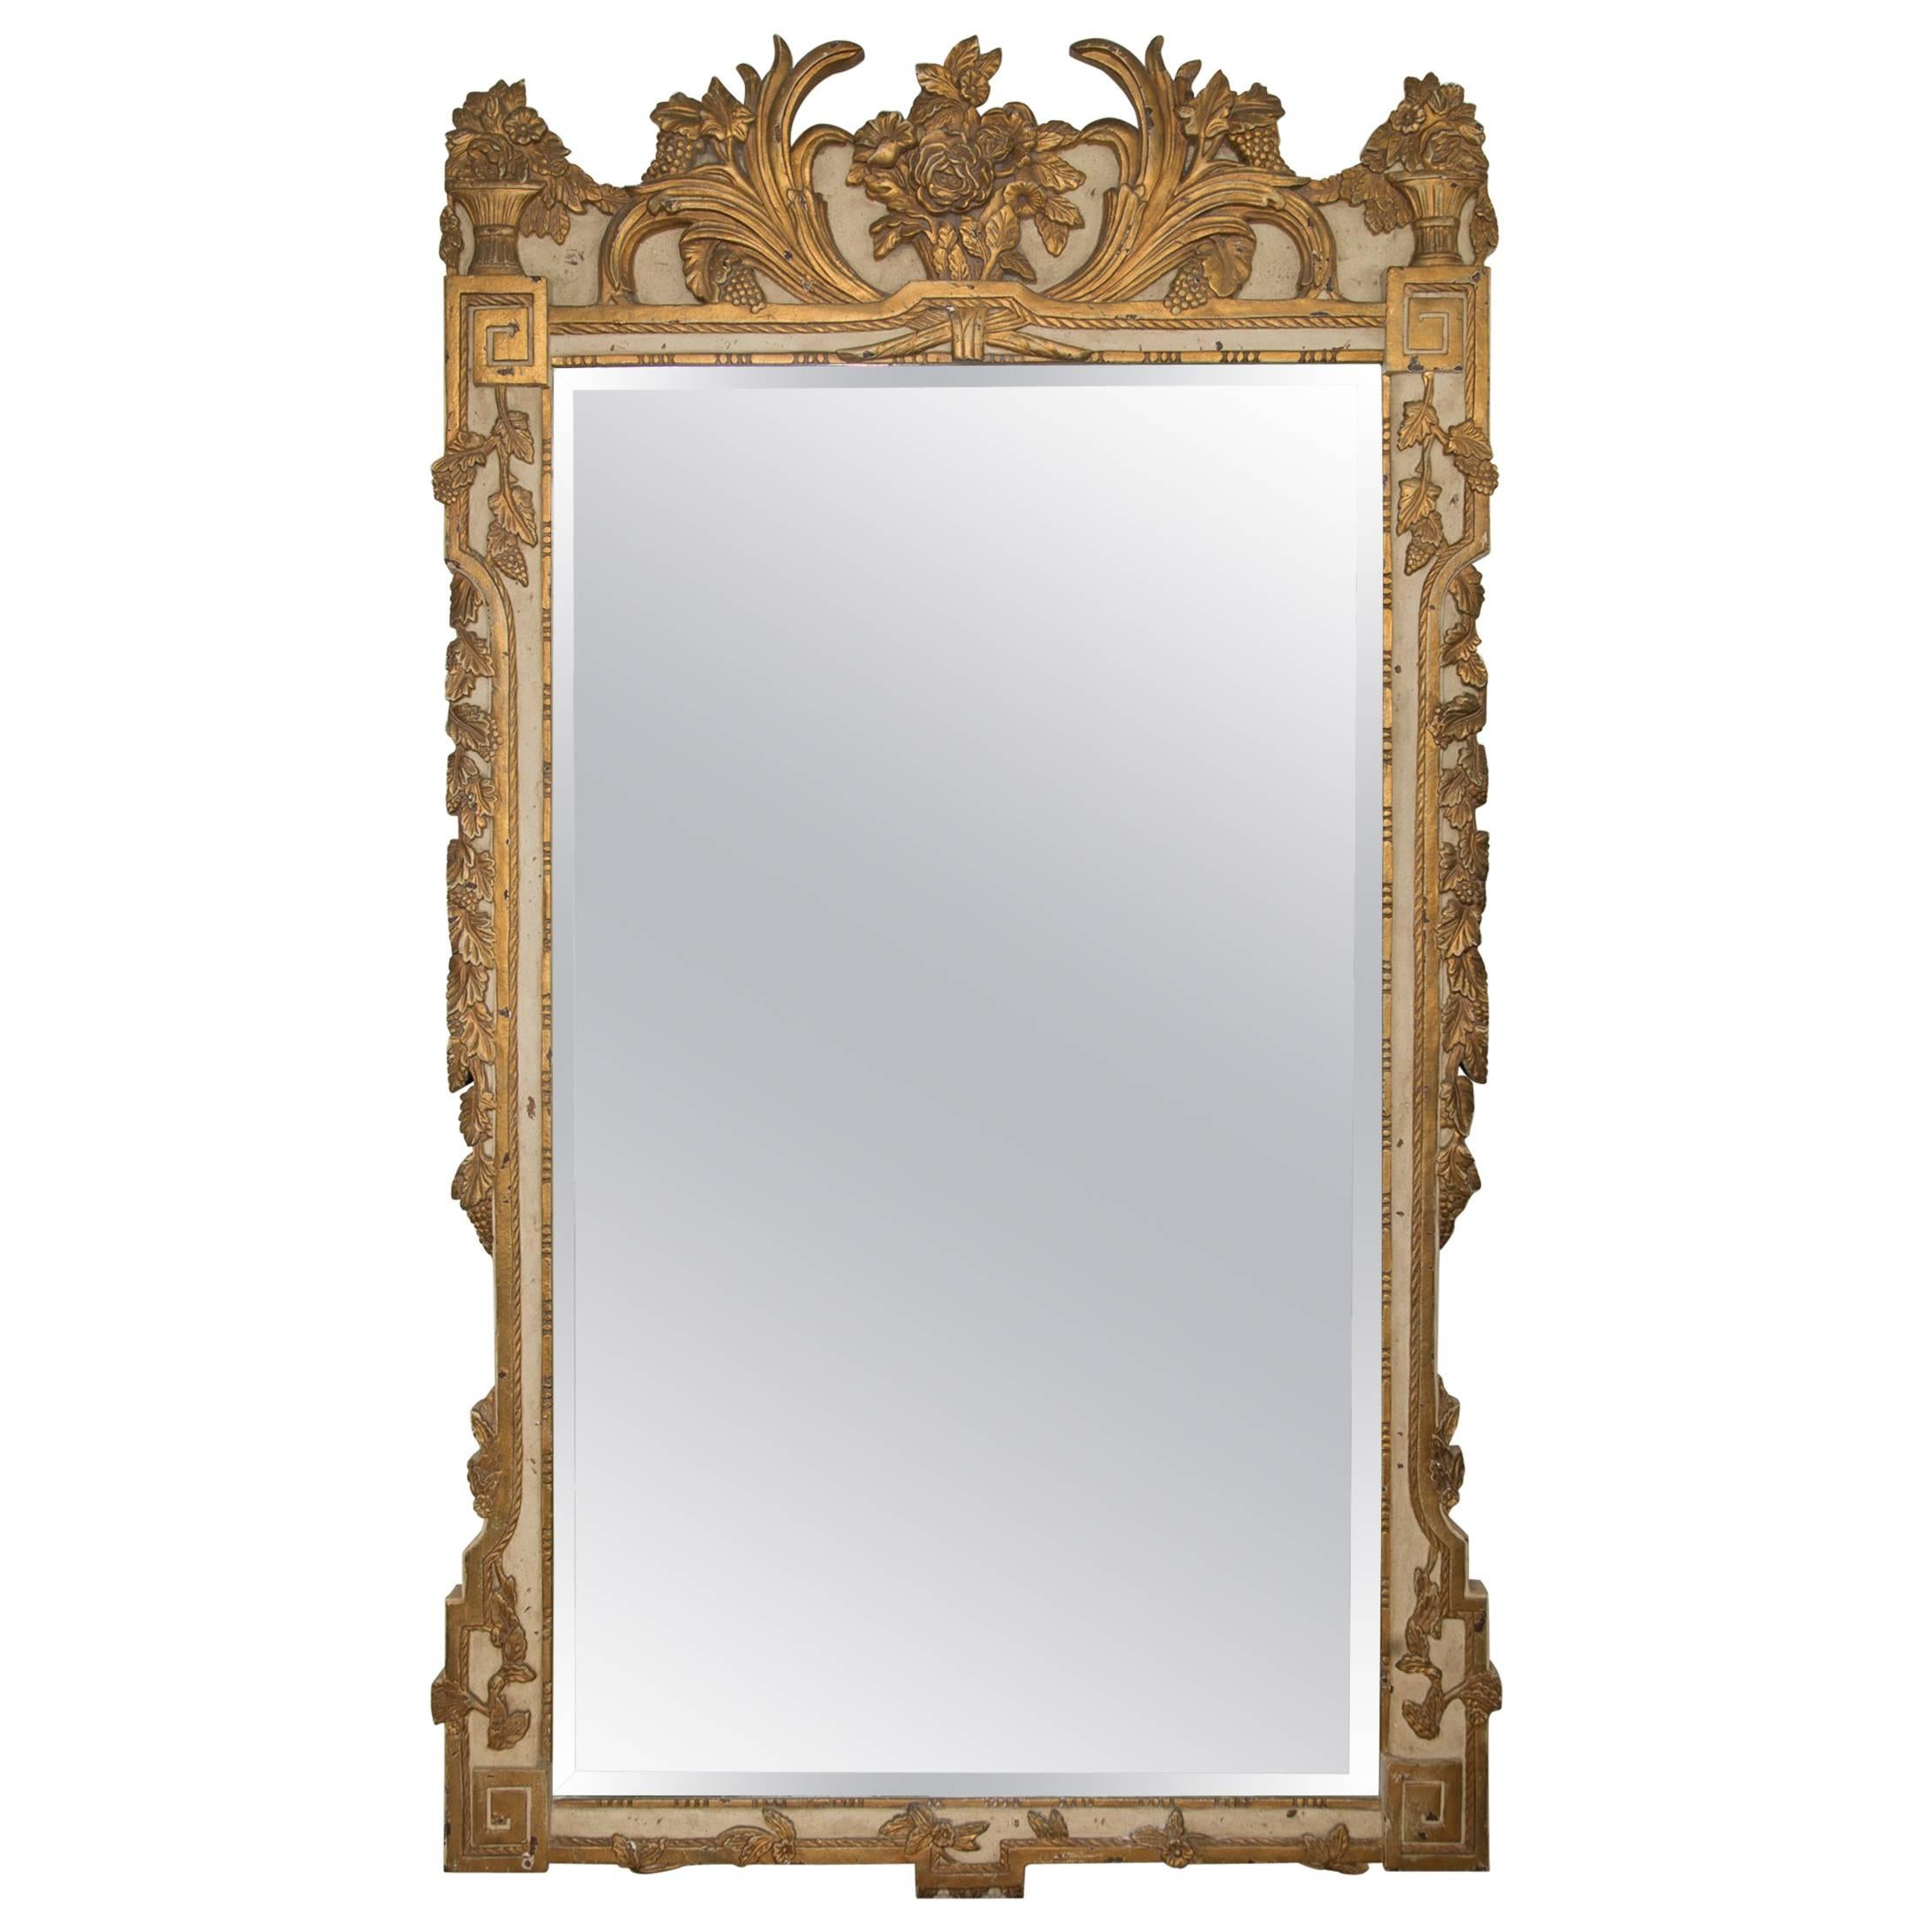 Louis XVI Style Parcel-Gilt and Cream-Painted Wall Mirror